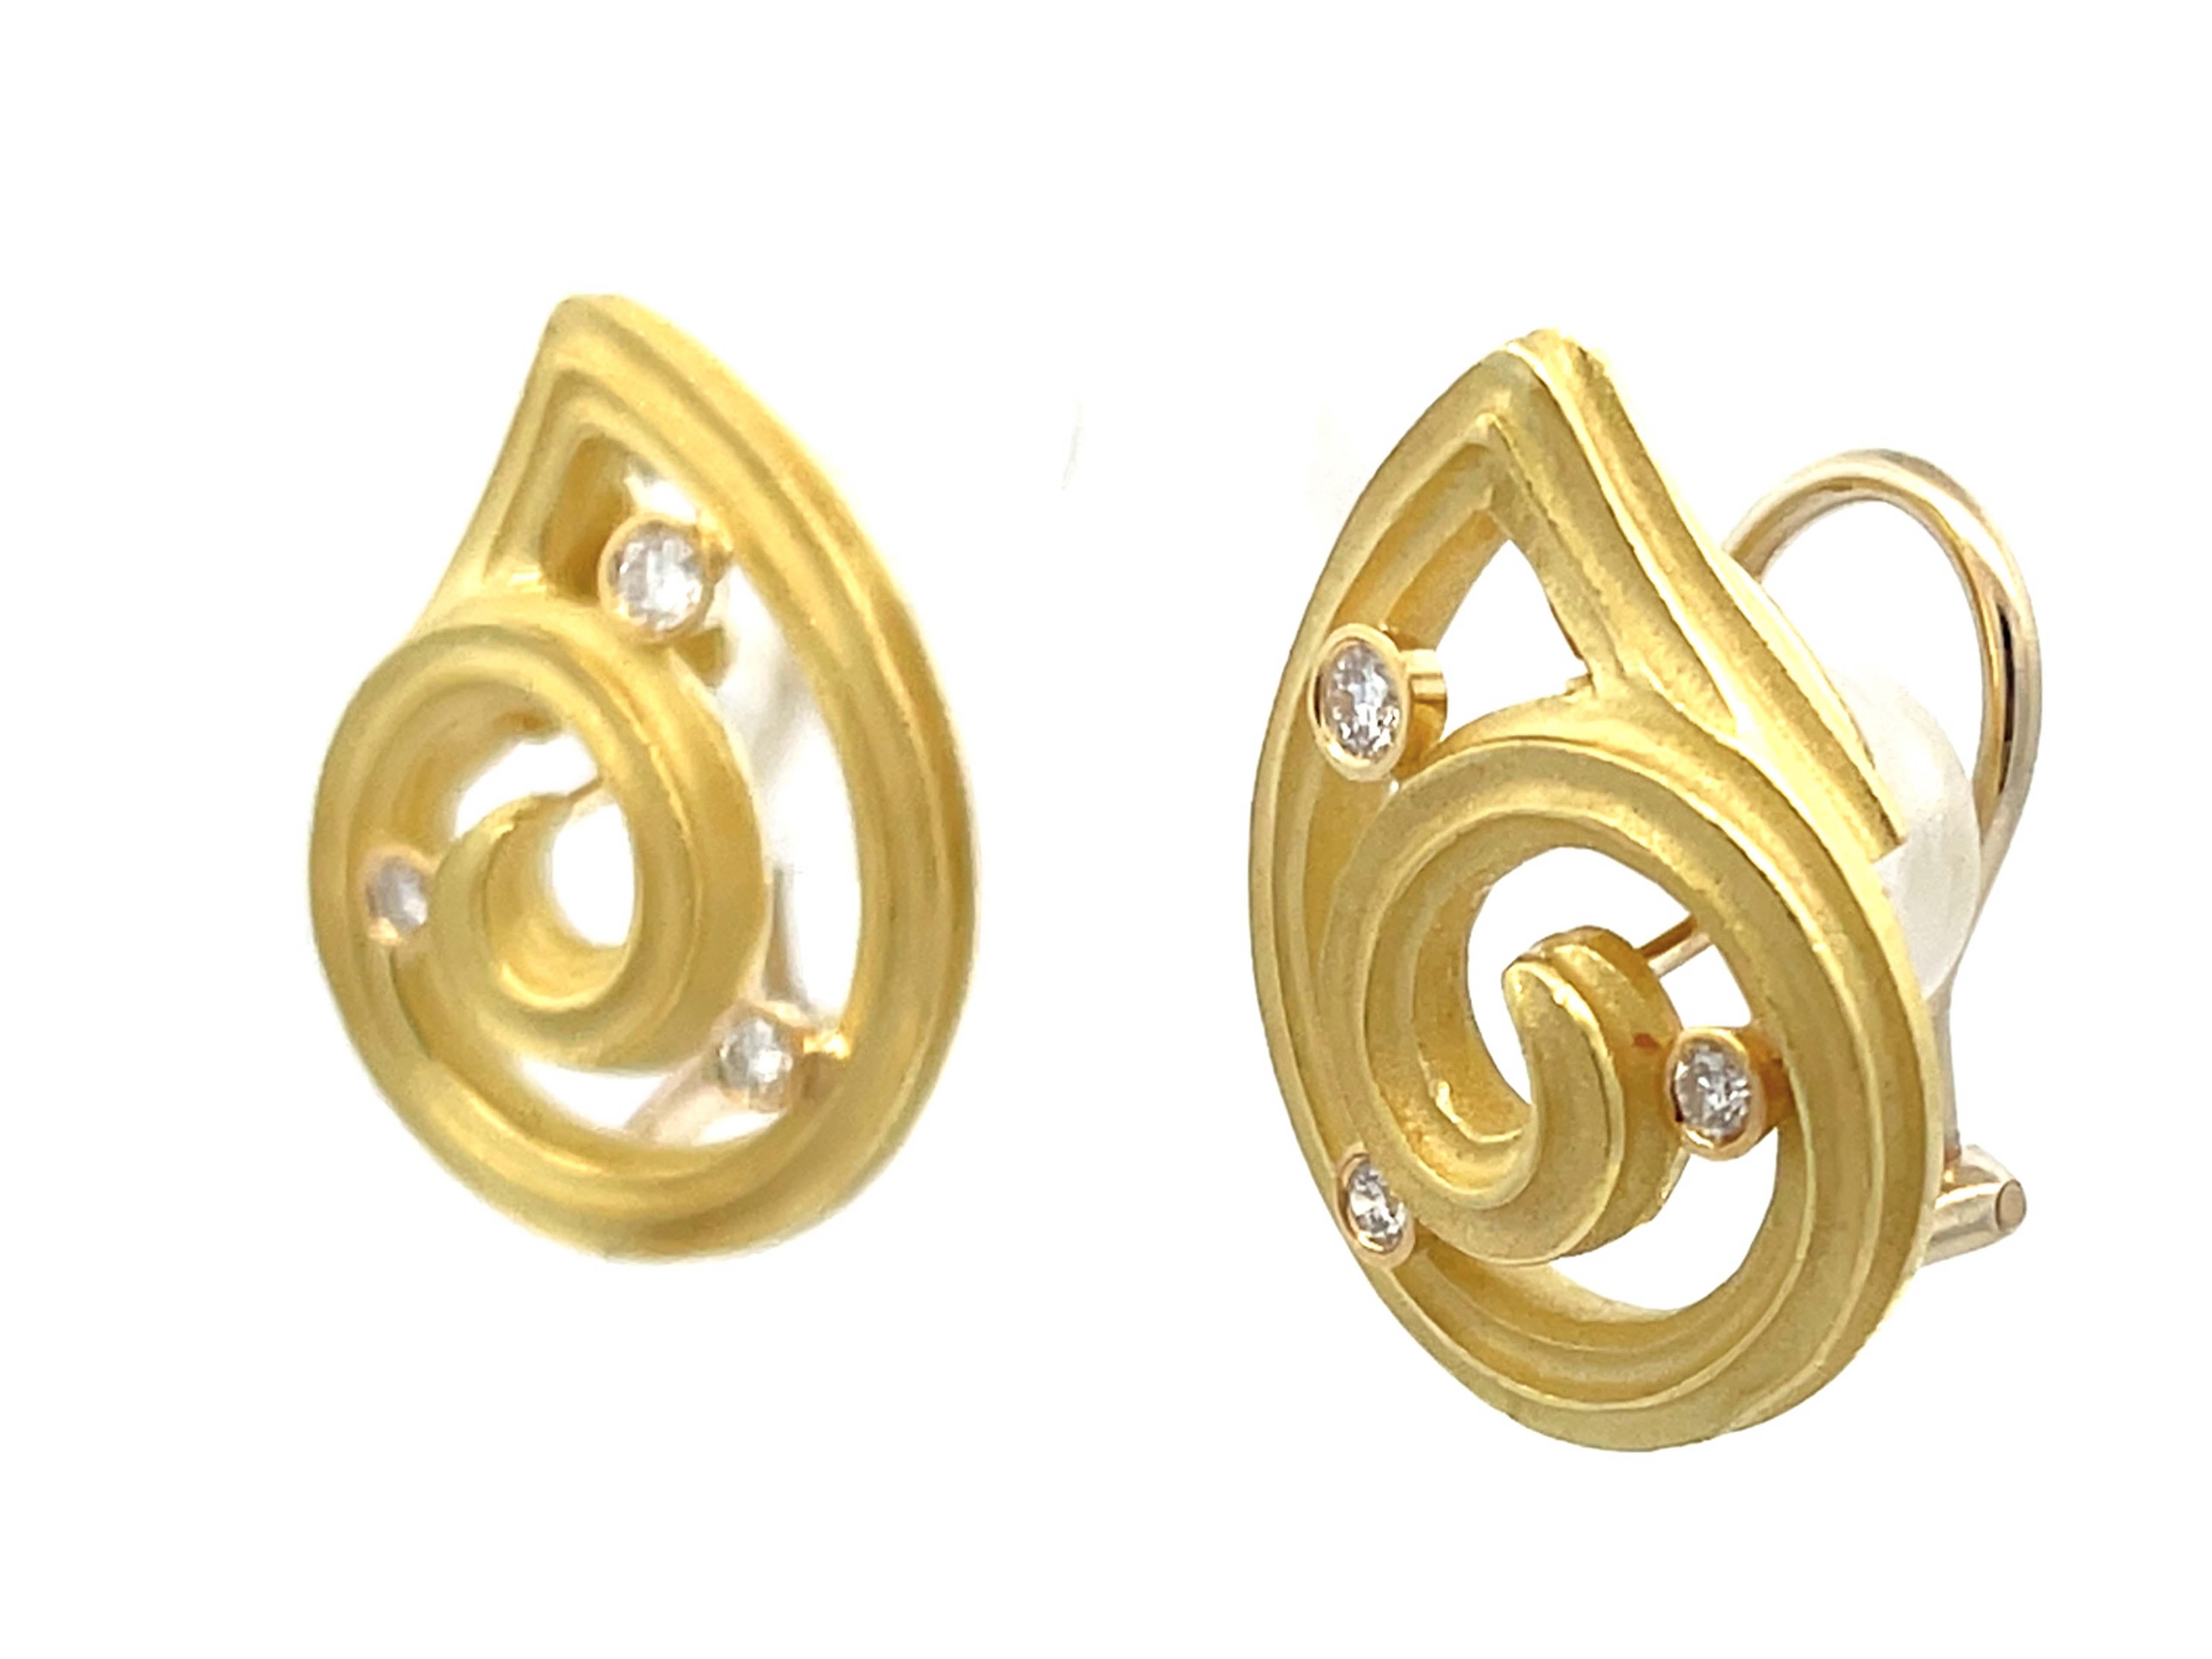 Diamond Swirl Frosted Finish Earrings in 14k Yellow Gold In Excellent Condition For Sale In Honolulu, HI